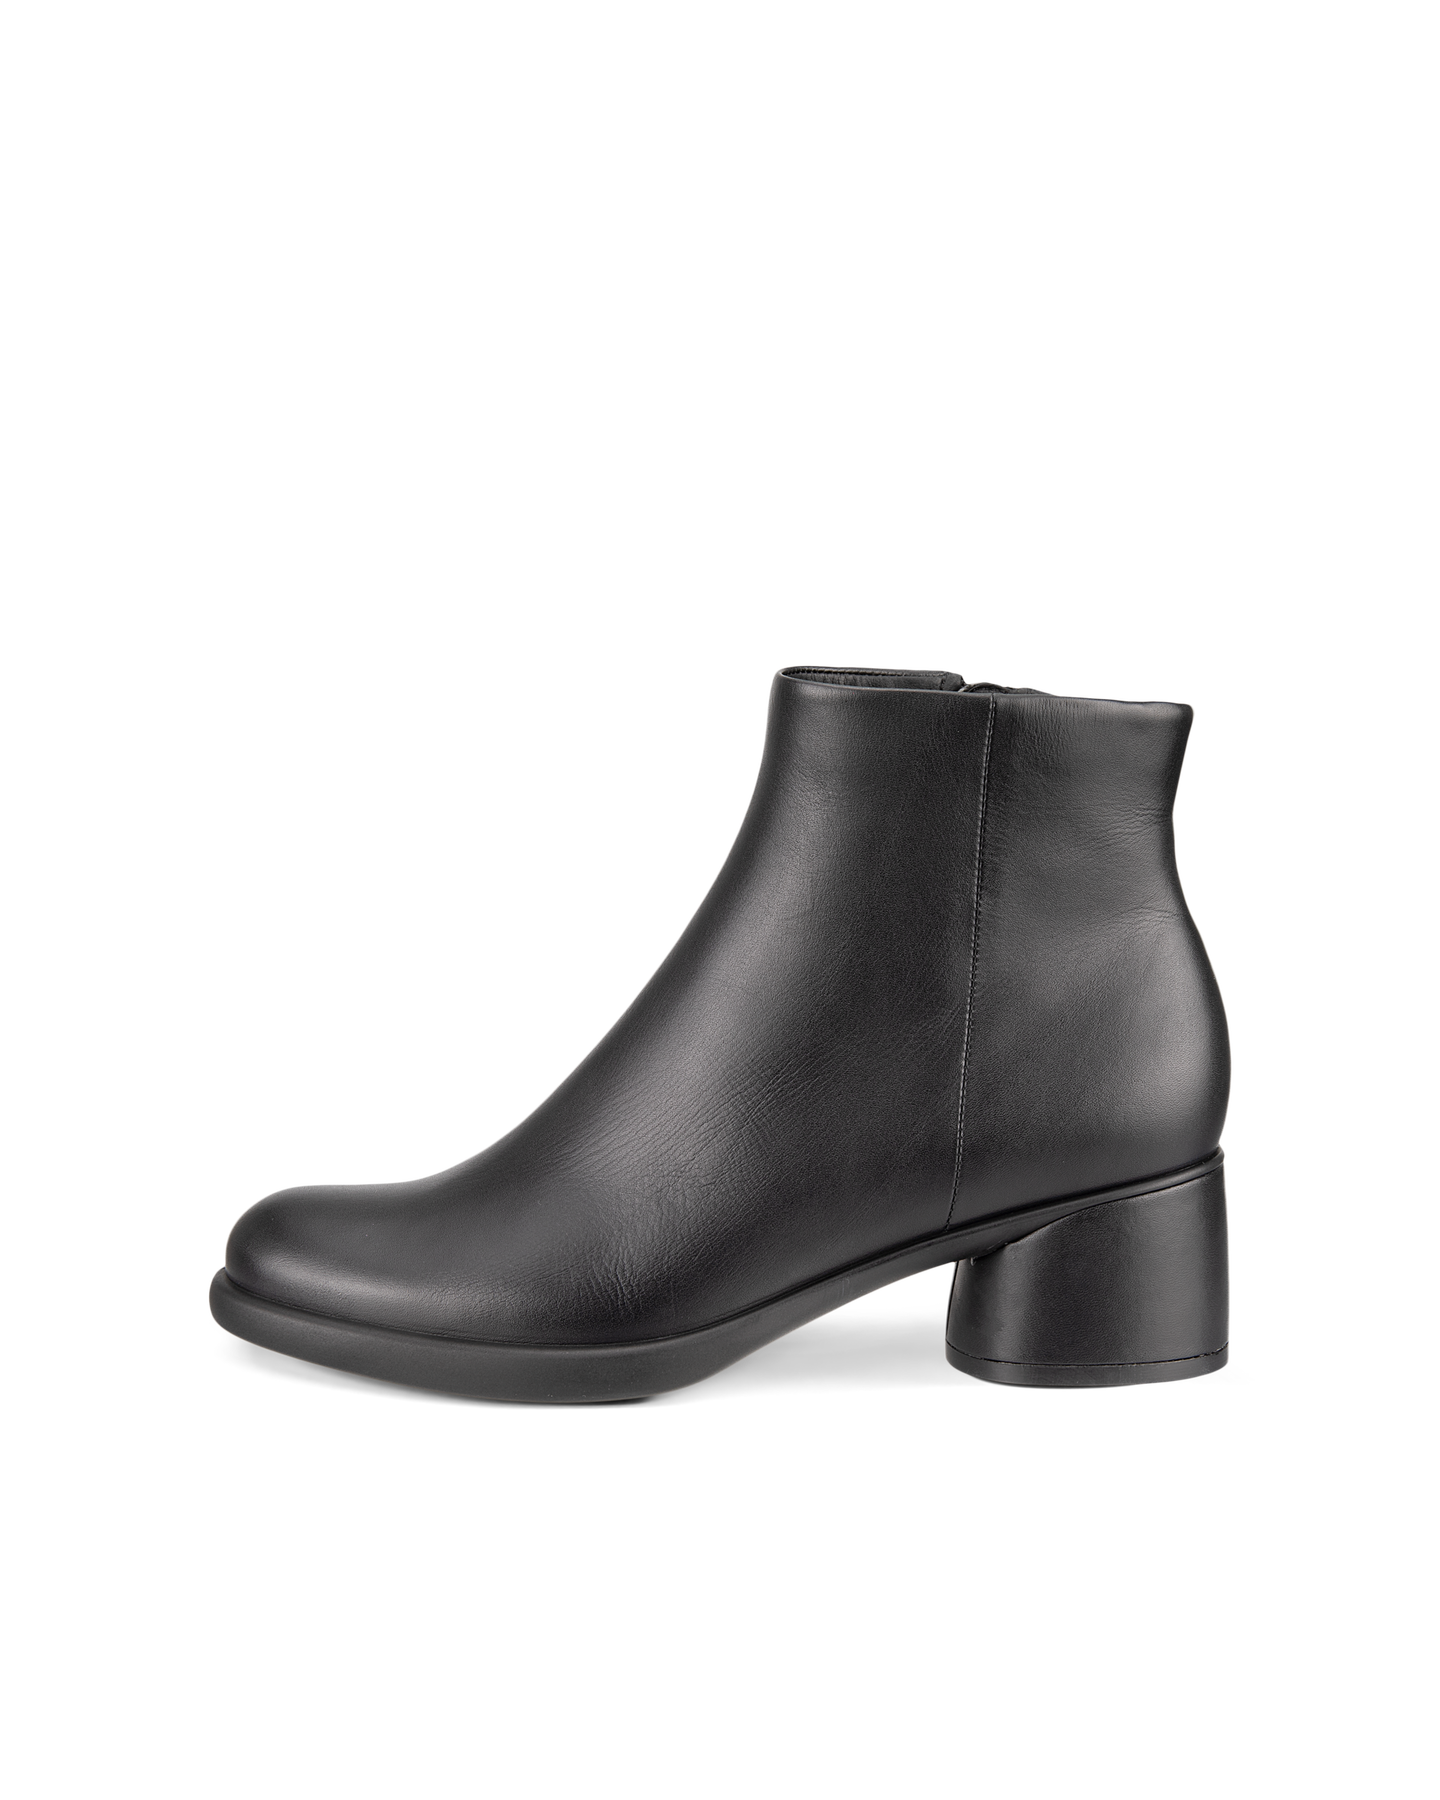 UPC 194891337458 product image for ECCO Women's Sculpted Lx 35 Ankle Boot Size 7 Leather Black | upcitemdb.com